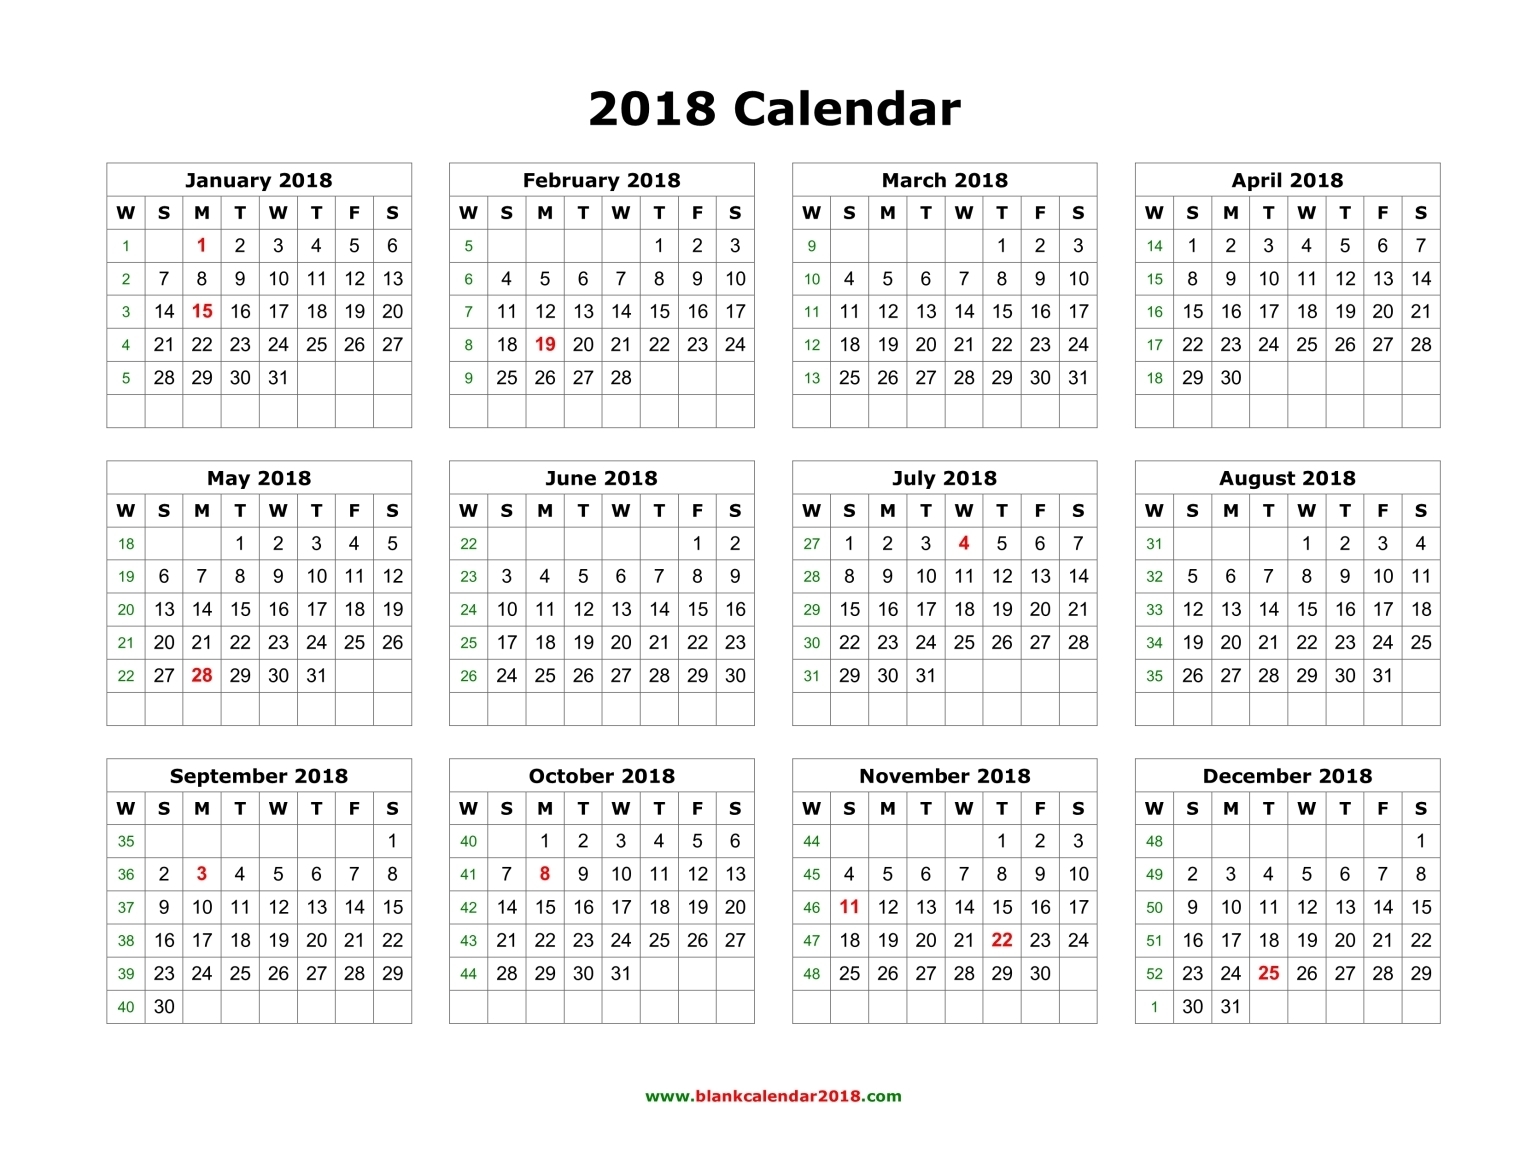 Download your FREE 2018 Printable Calendars today! There are 28 